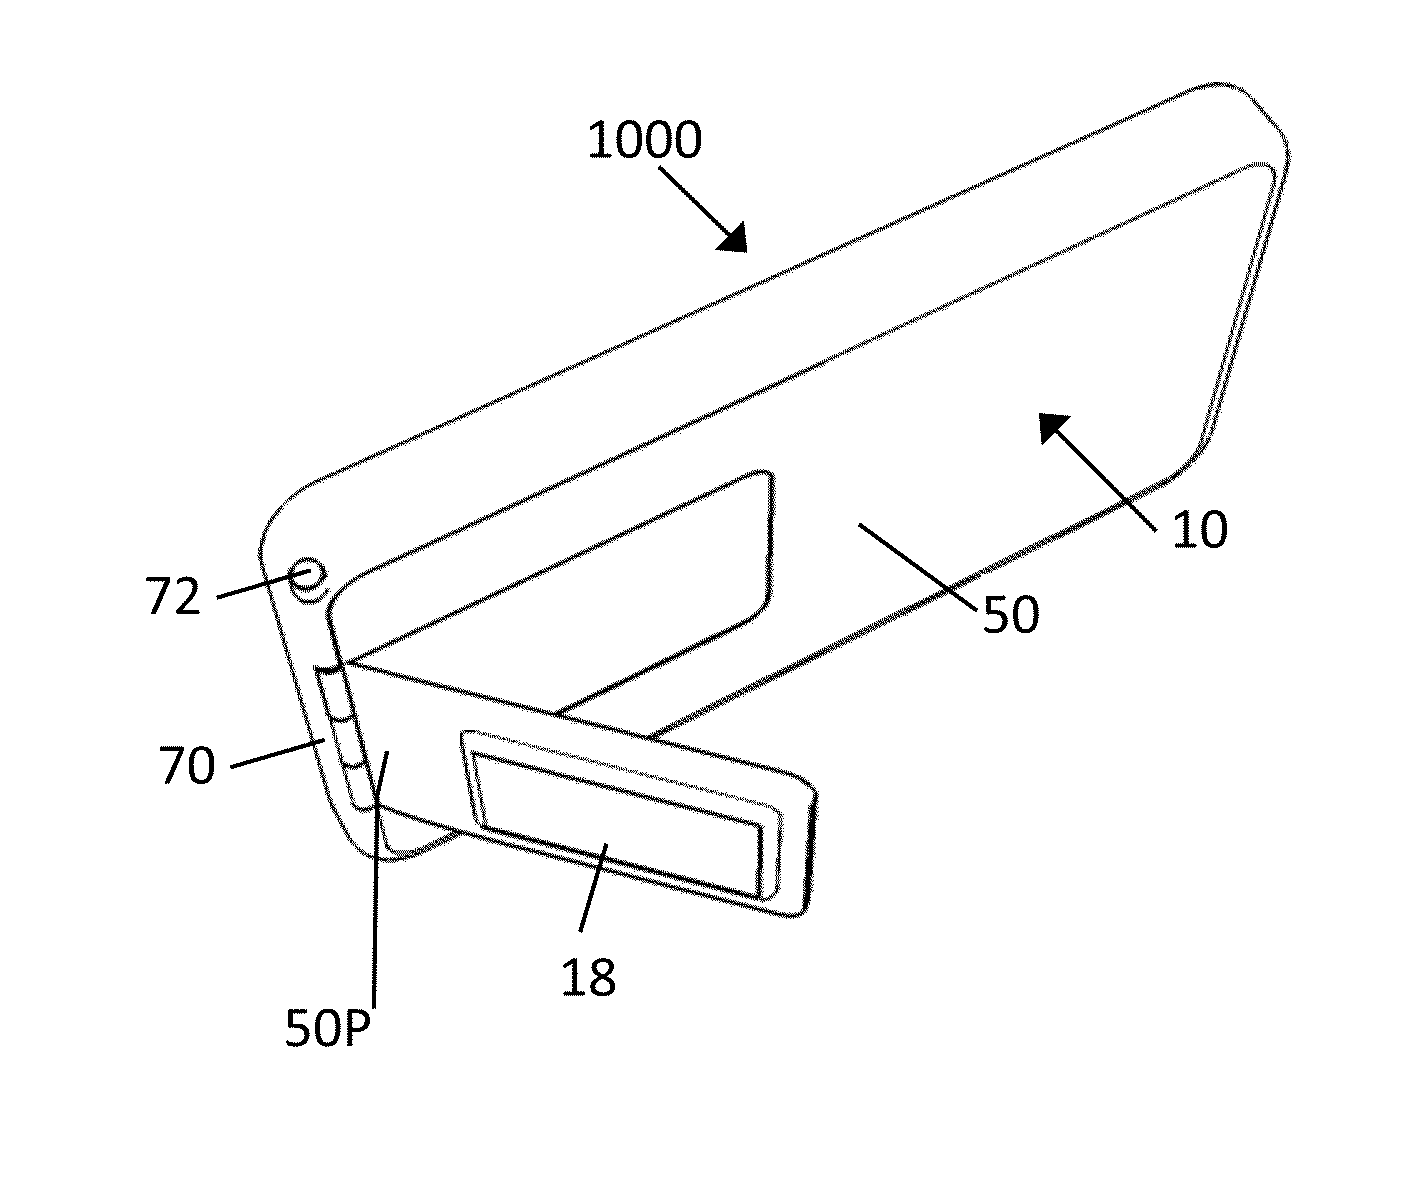 Portable Ultrasound System Comprising Ultrasound Front-End Directly Connected to a Mobile Device